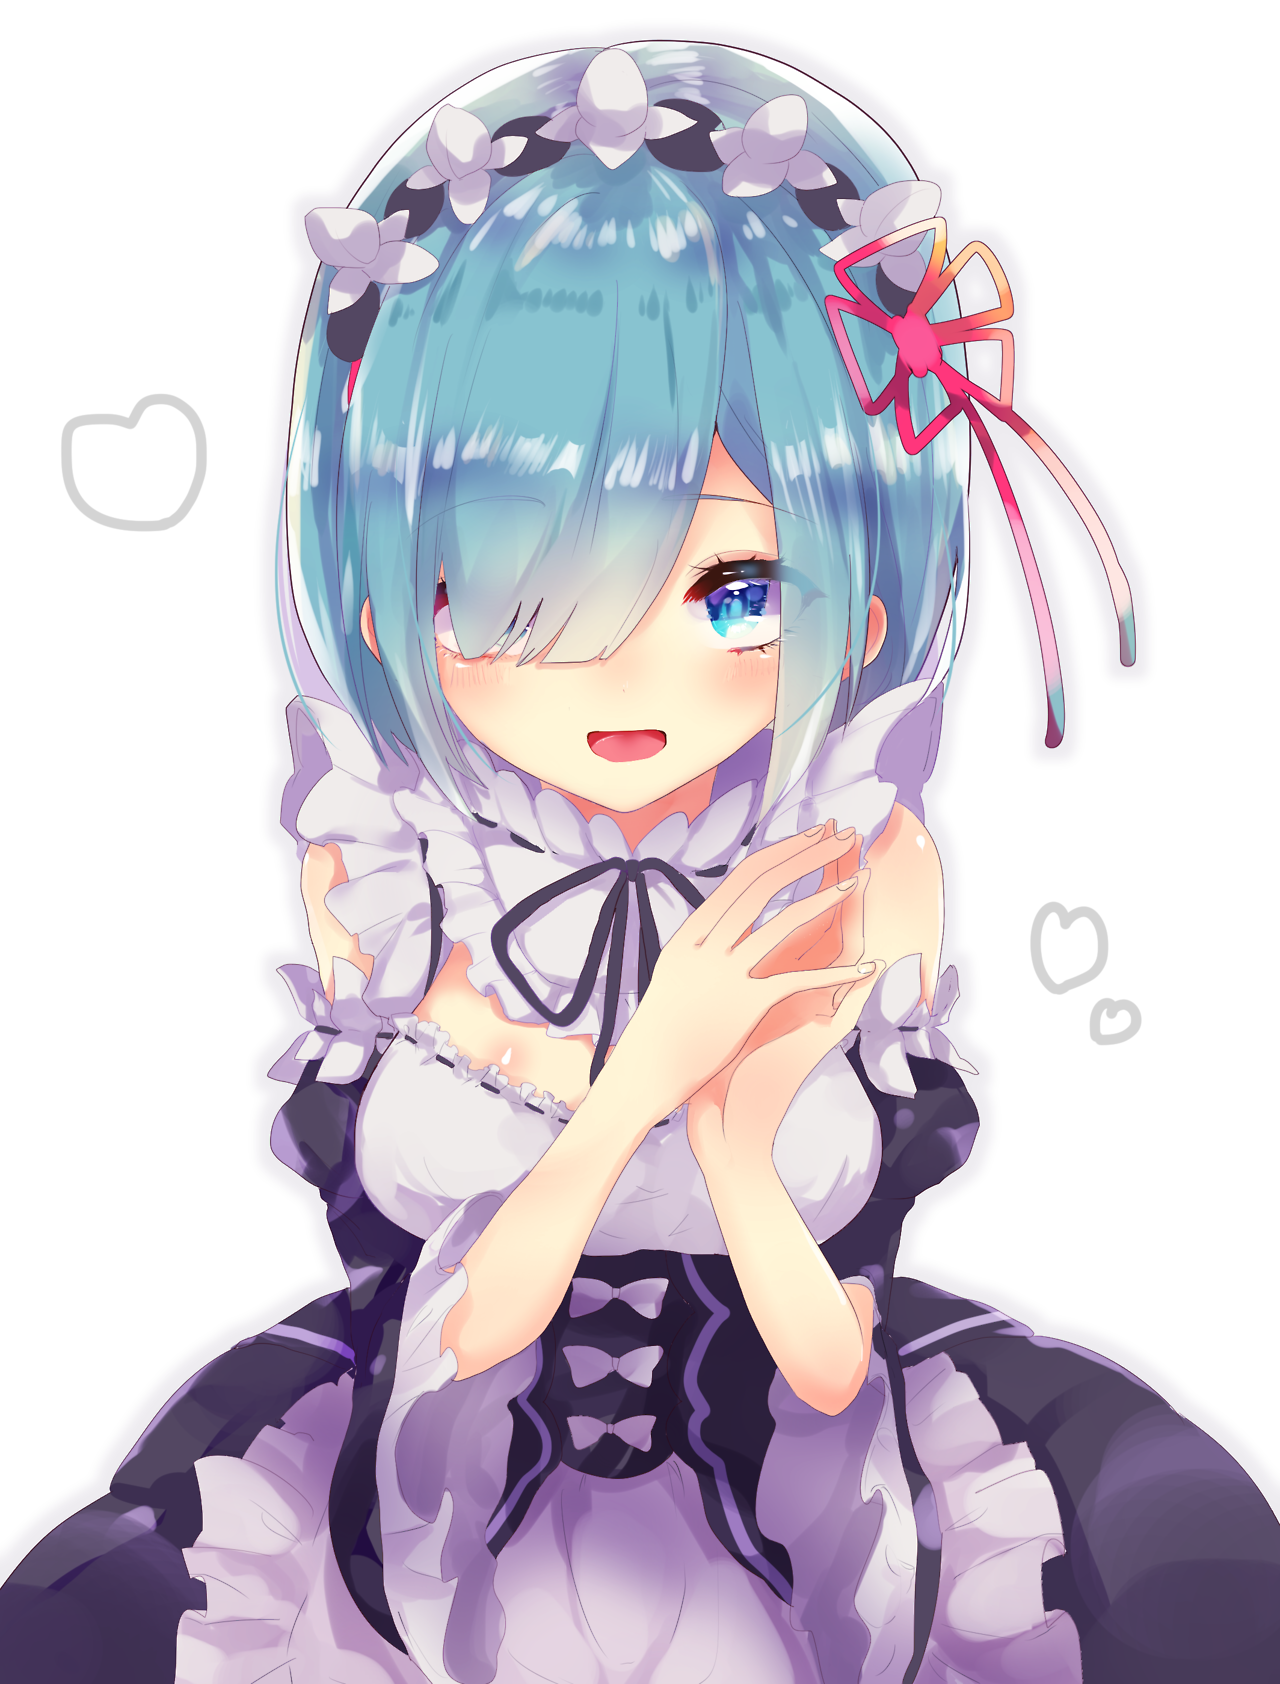 rem in anime is What